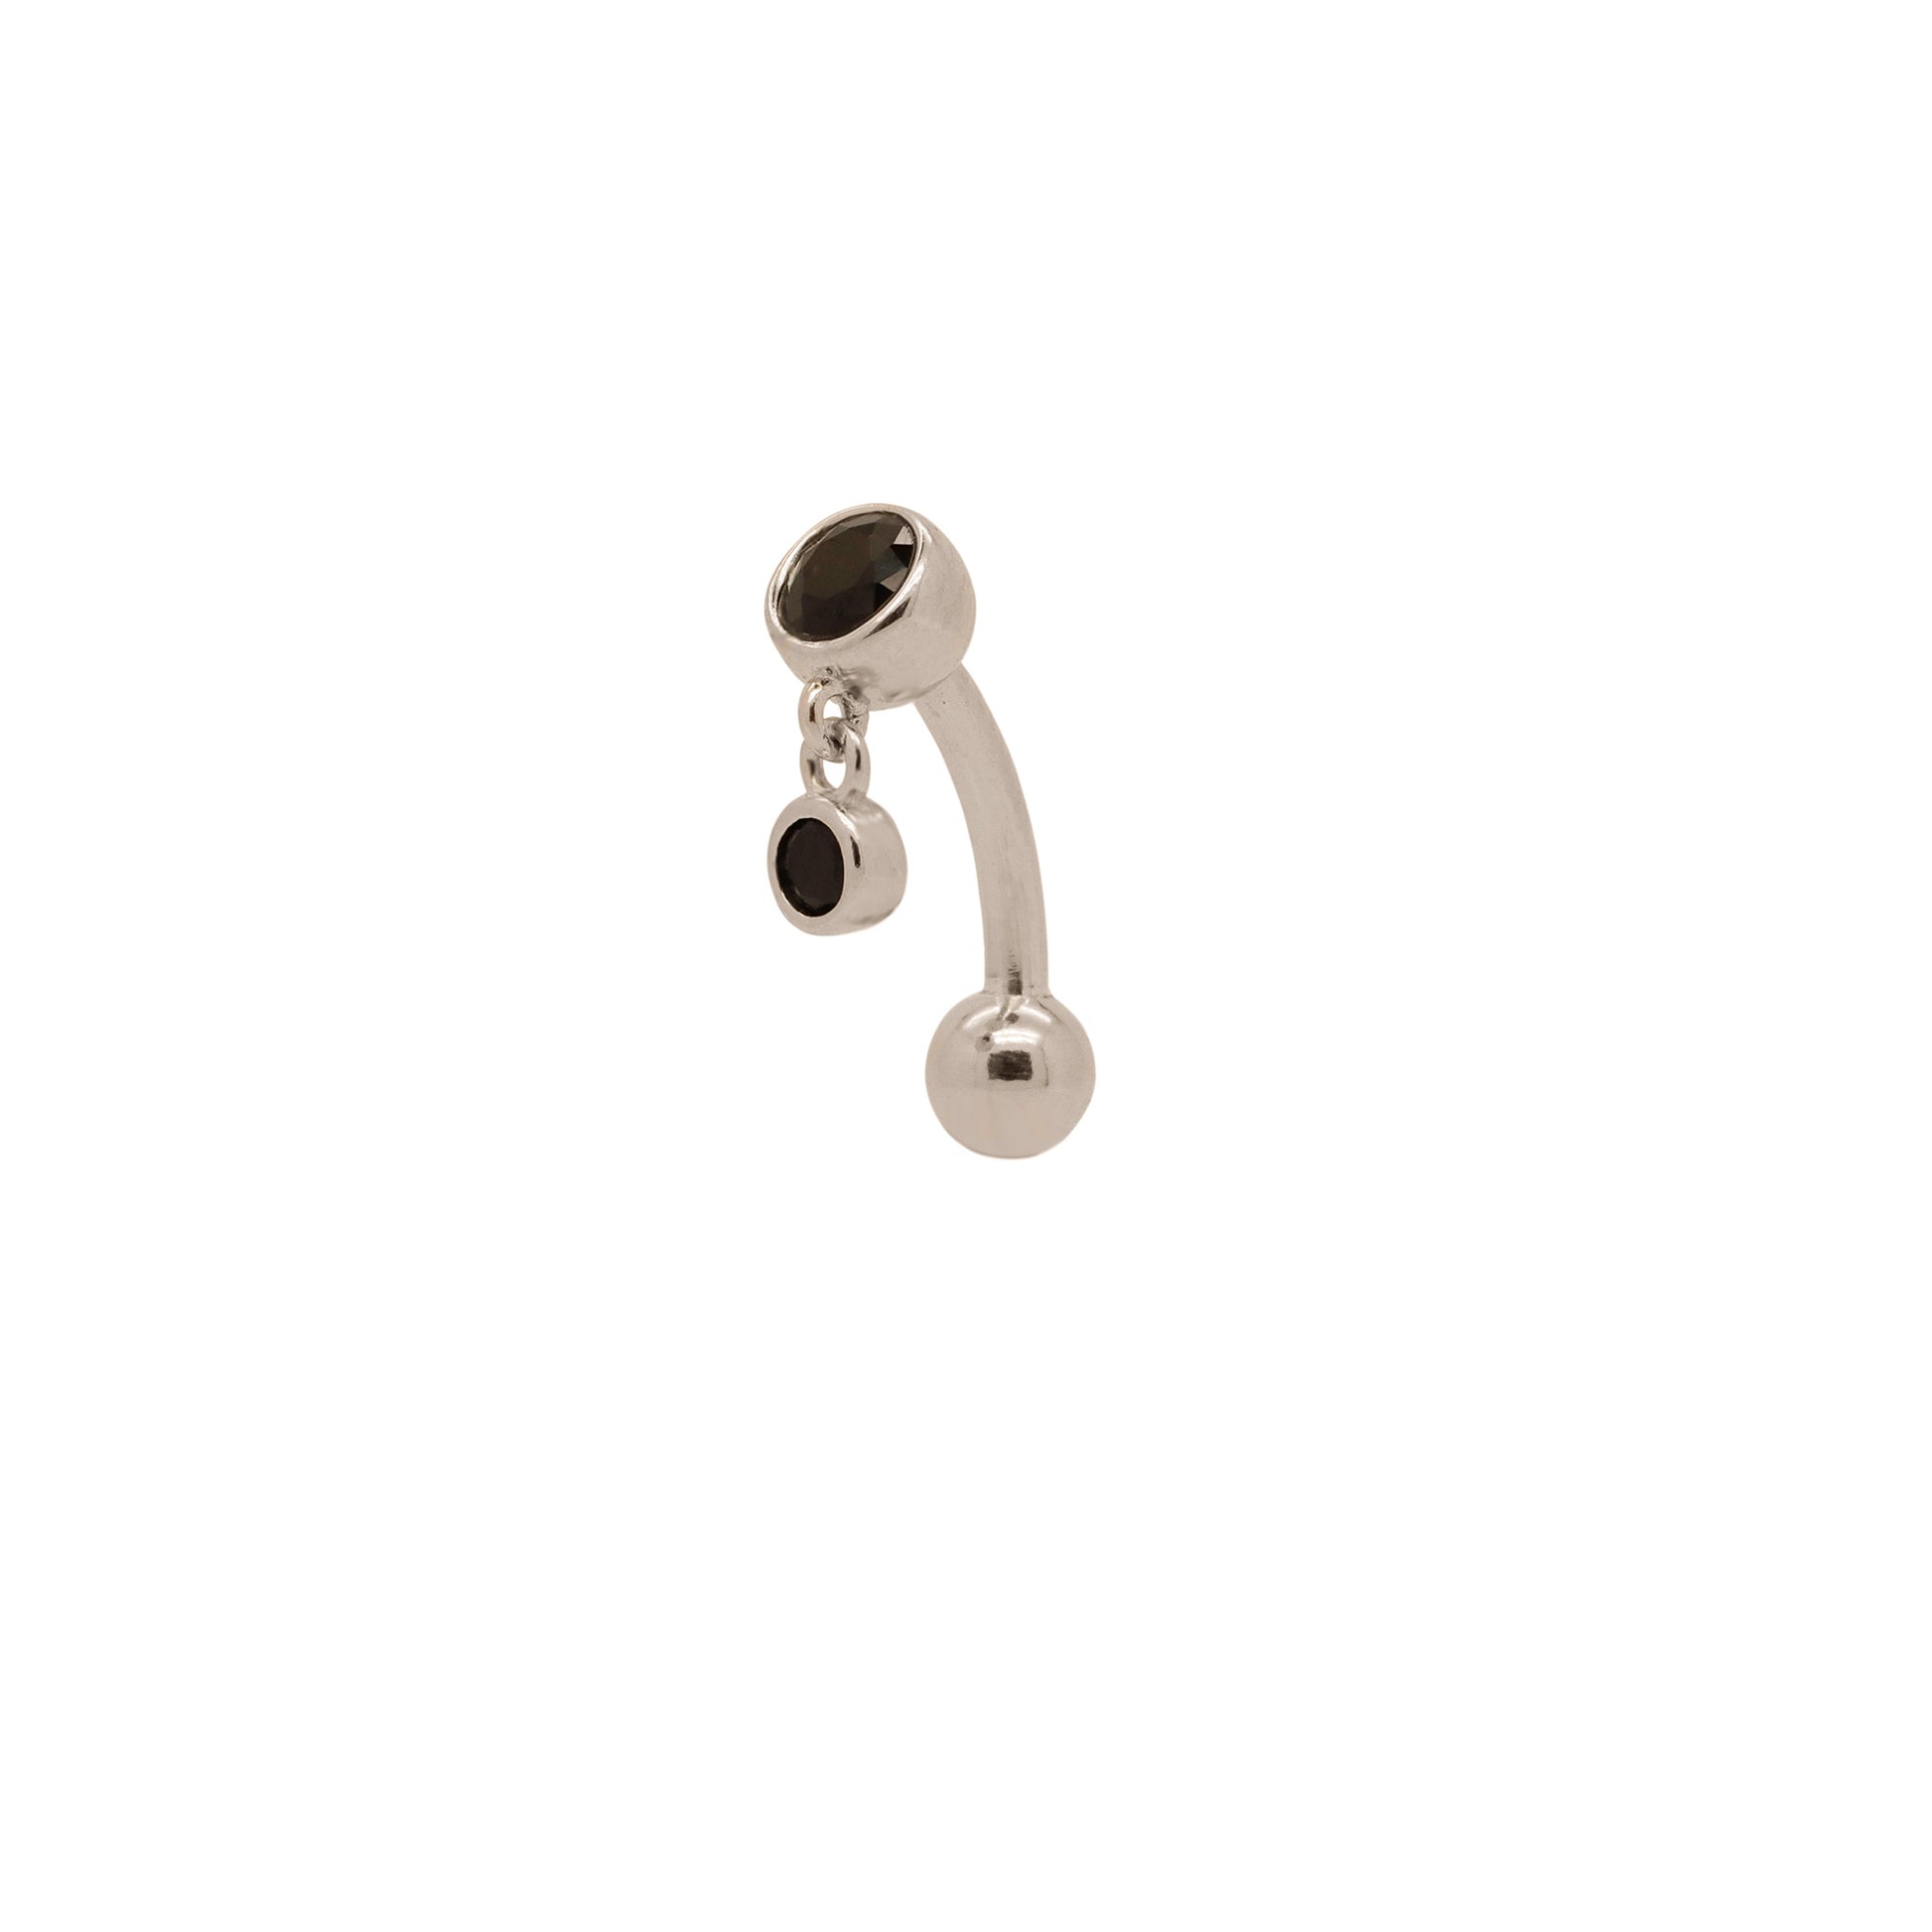 Solid 925 Silver | 16G 14G Black Petite Charm Dangle Reverse Belly Ring | 6mm 1/4" 8mm 5/16" 10mm 3/8" - Sturdy South